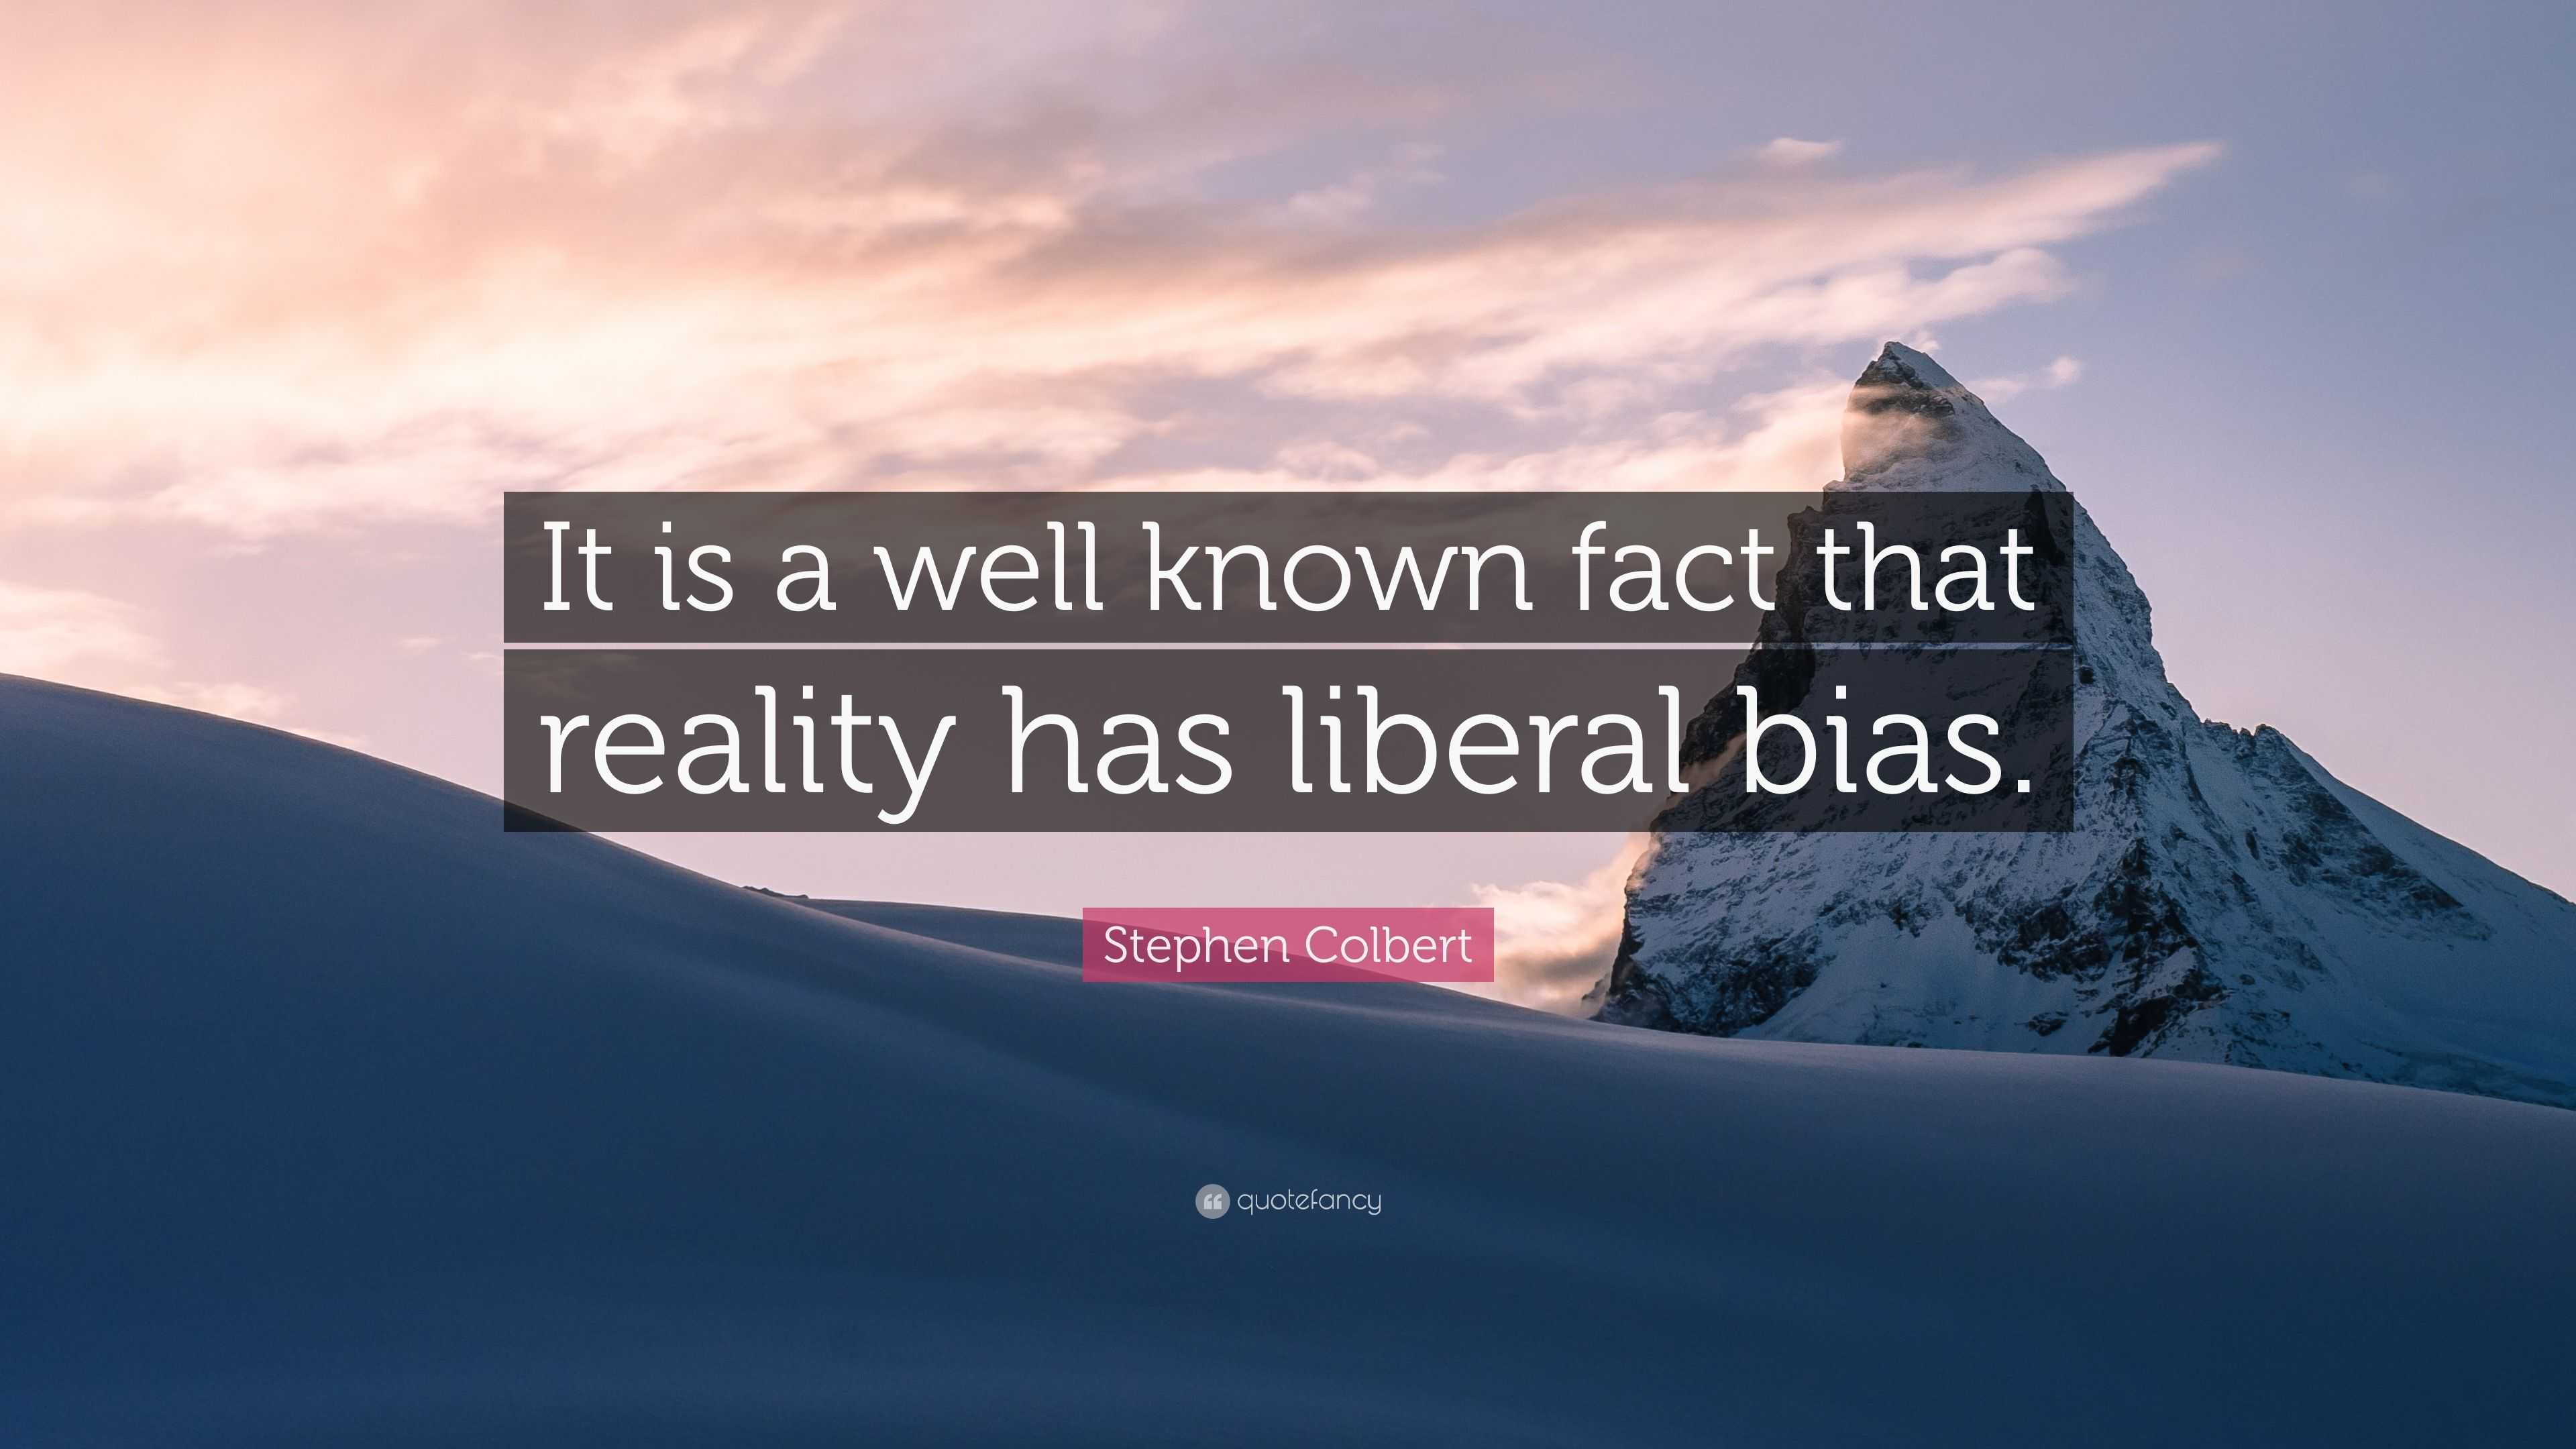 Stephen Colbert Quote “it Is A Well Known Fact That Reality Has